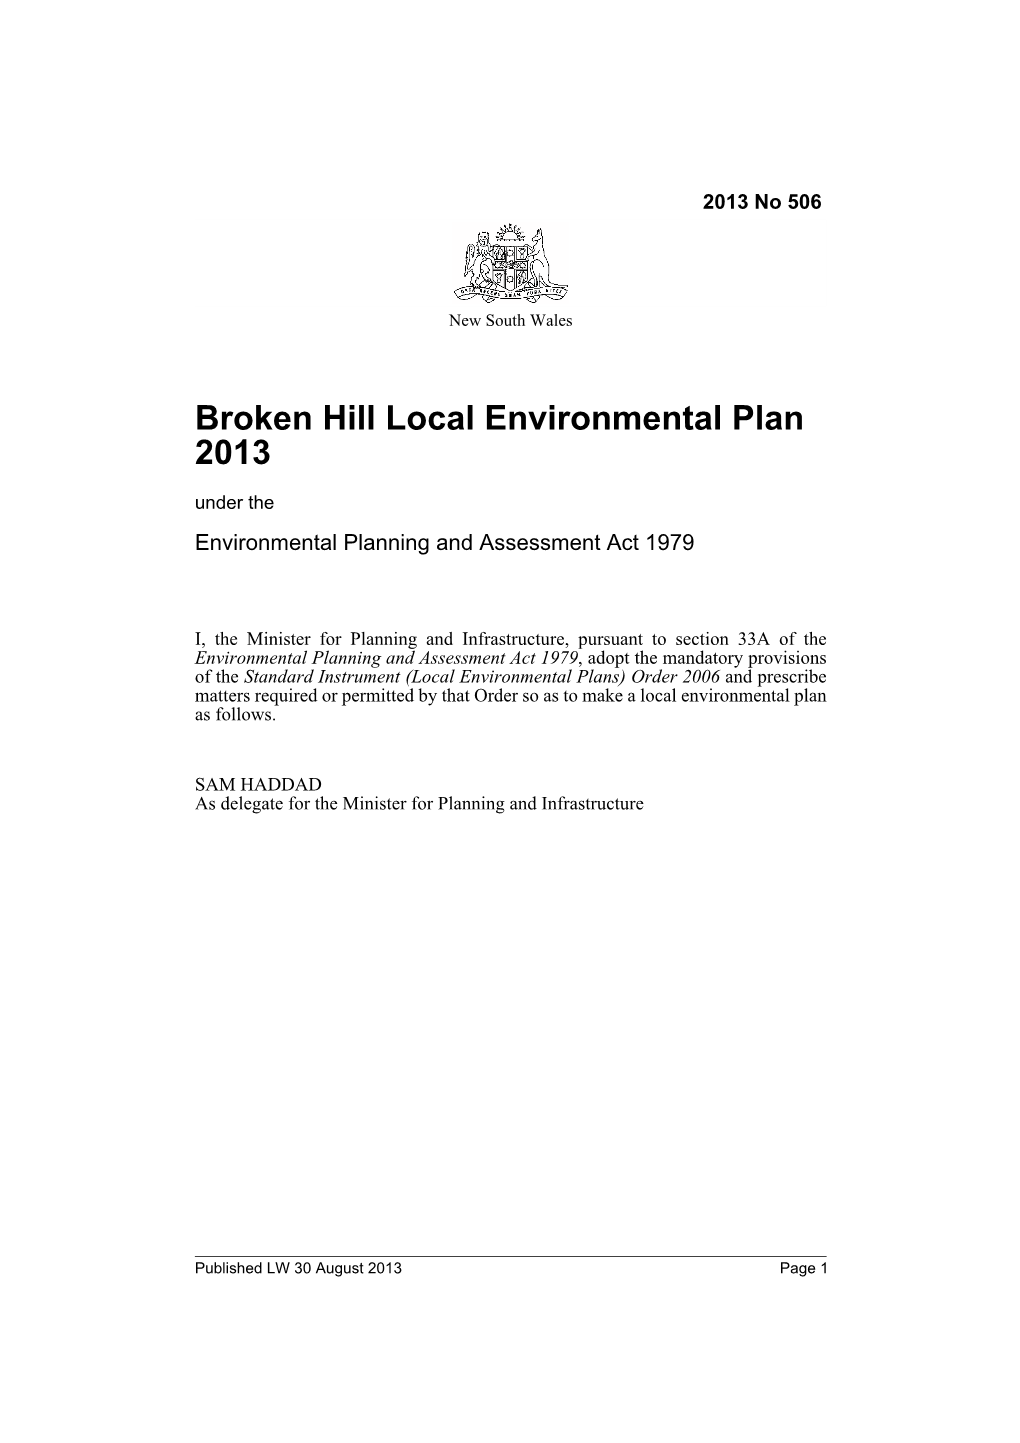 Broken Hill Local Environmental Plan 2013 Under the Environmental Planning and Assessment Act 1979